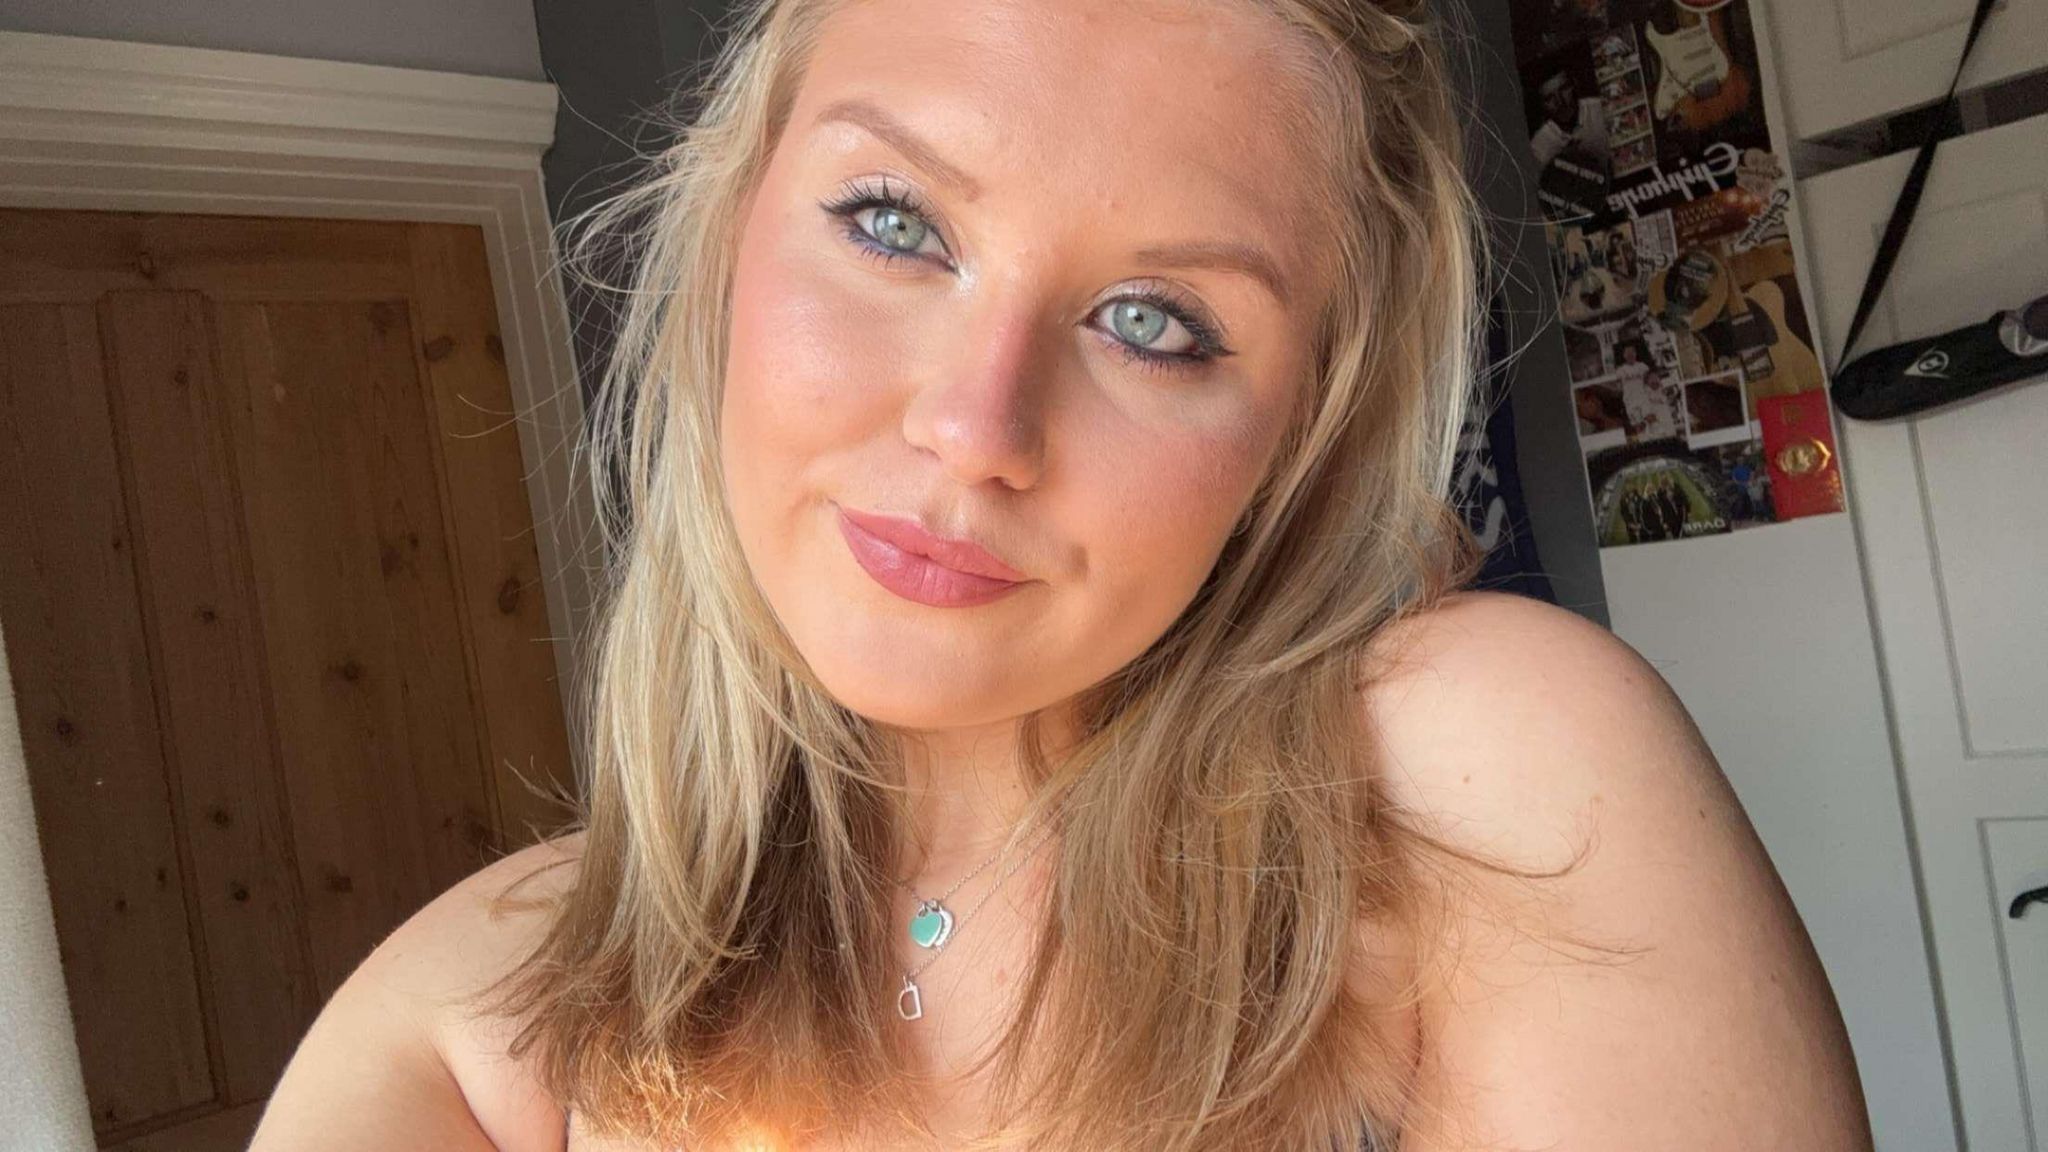 A selfie of a blonde girl with greenish, blue eyes in a bedroom